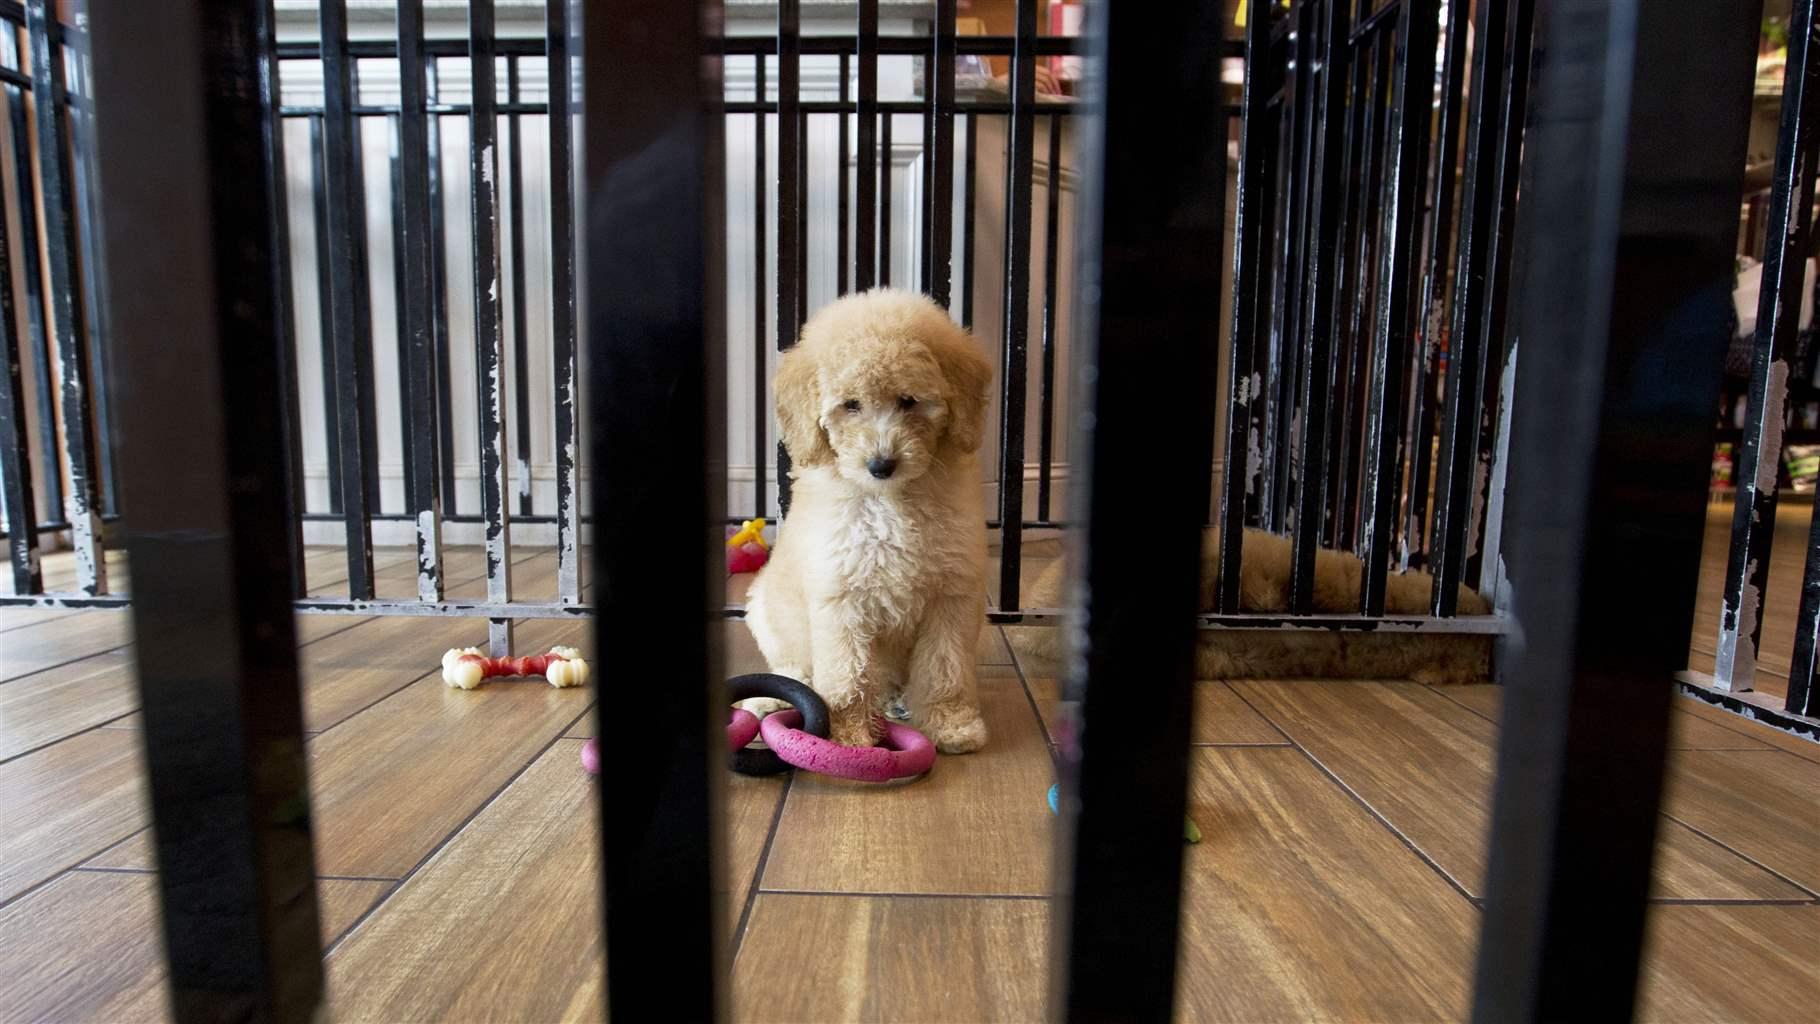 A puppy plays with toys at a pet store in Columbia, Md., Monday, Aug. 26, 2019.